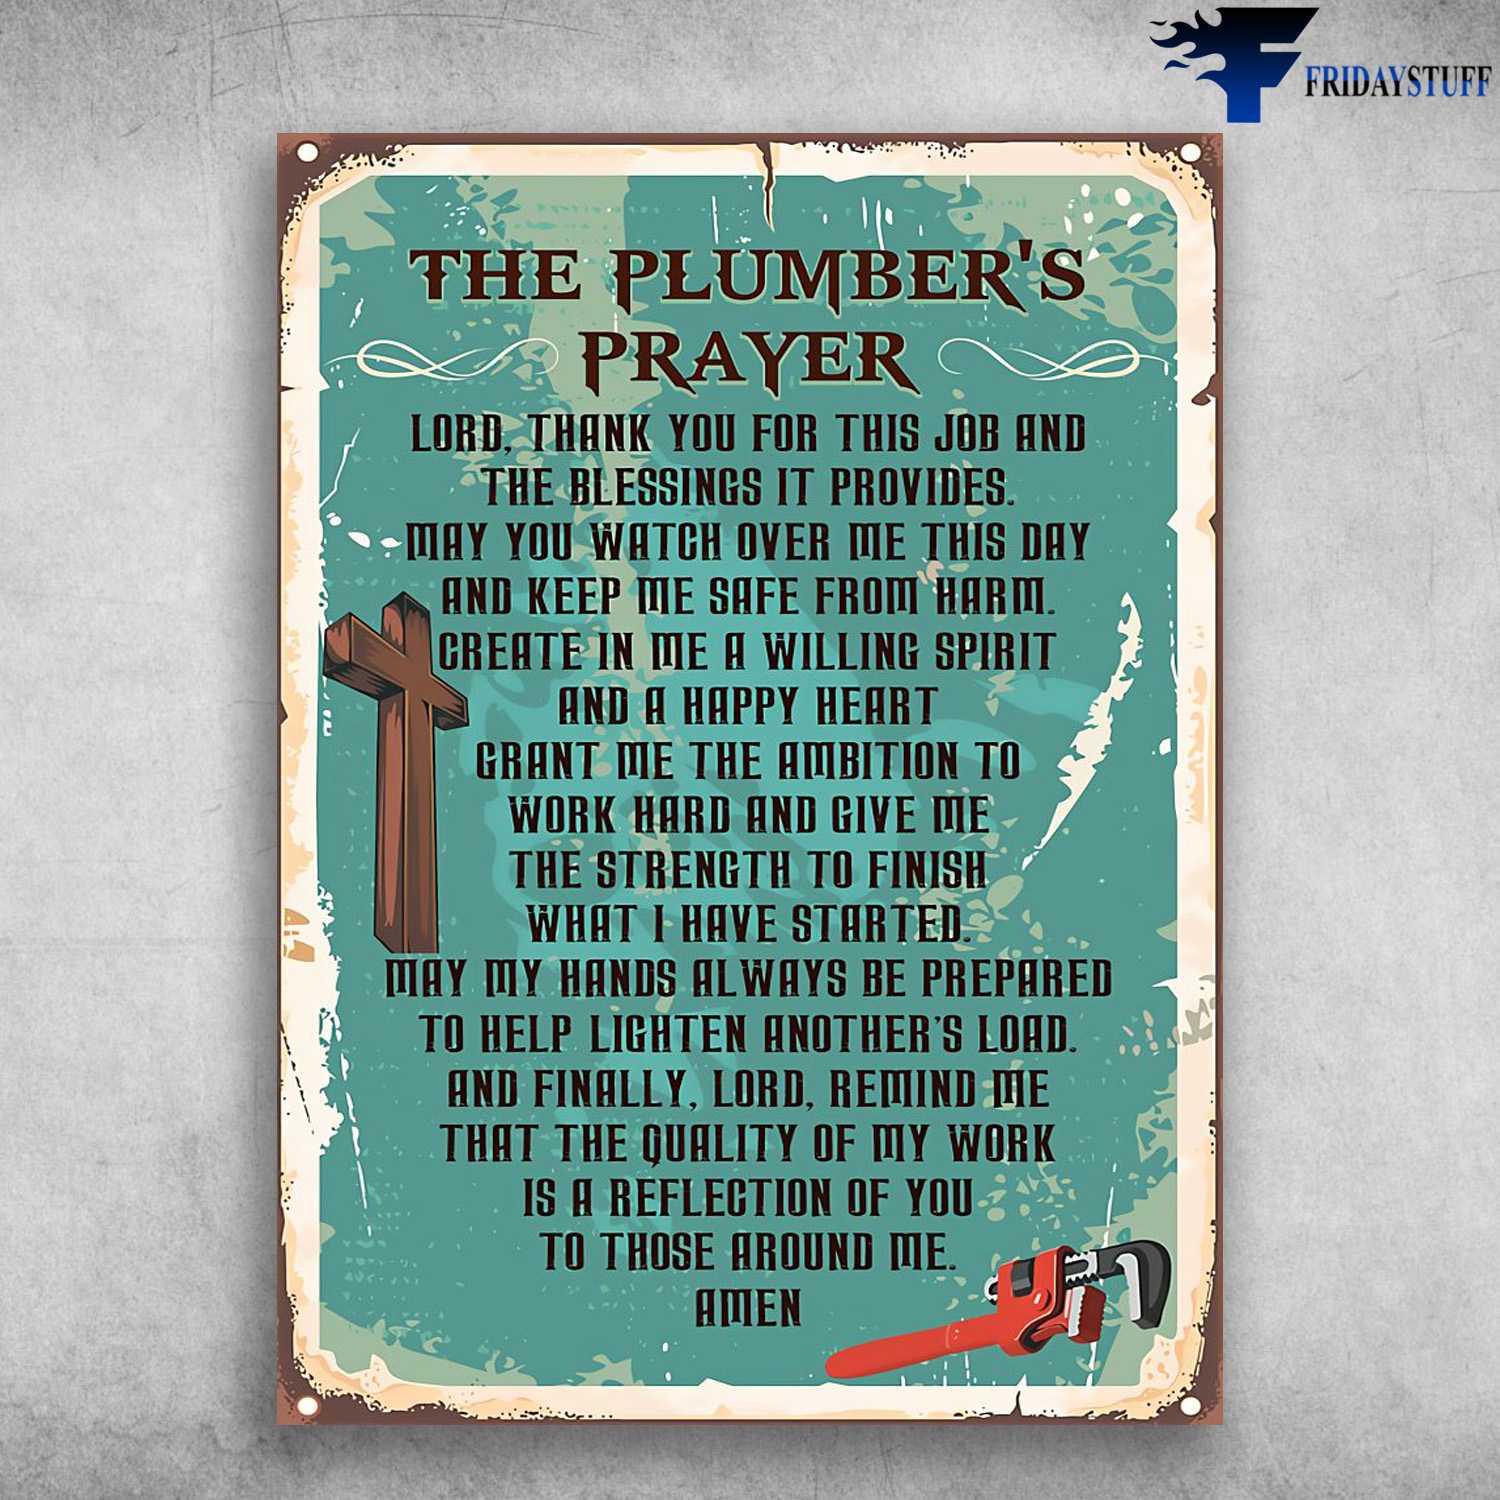 Plumber Poster, The Plumber's Prayer, Lord, Thank You For This Job, And The Blessings It Provdies, May You Watch Over Me This Day, And Keep Me Safe From Harm